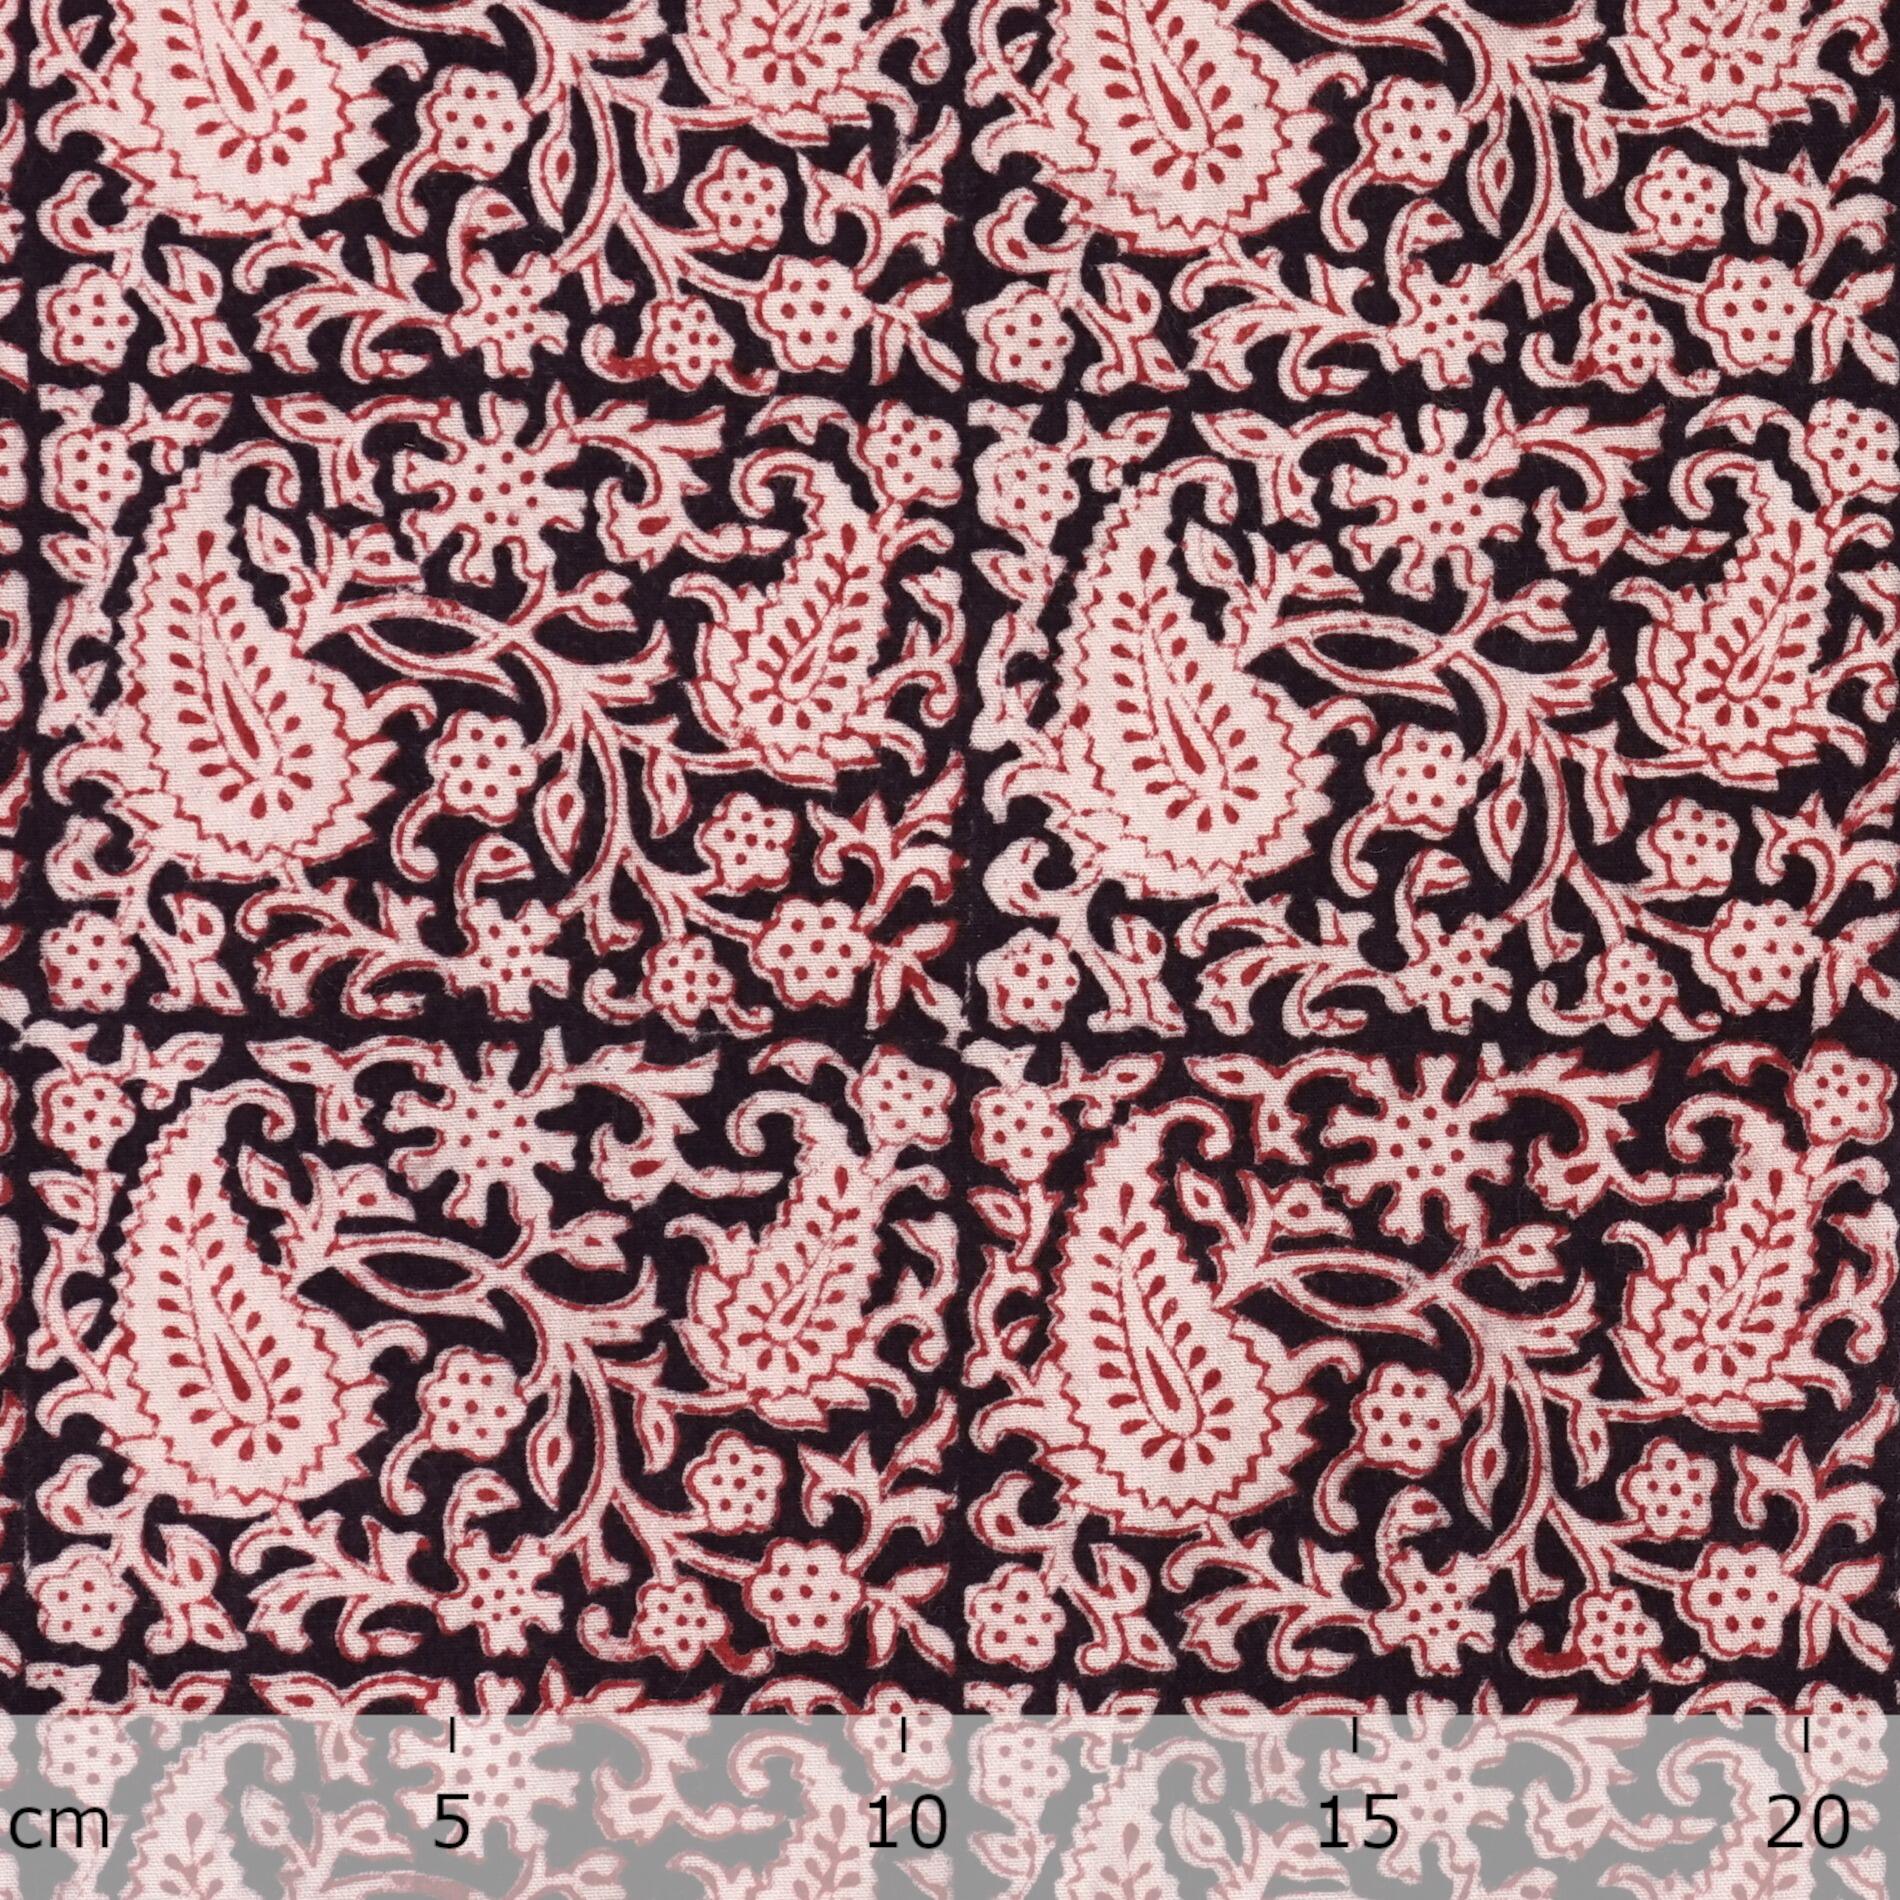 100% Block-Printed Cotton Fabric From India- Bagh - Iron Rust Black Alizarin Red Tulgey Wood Print - Ruler